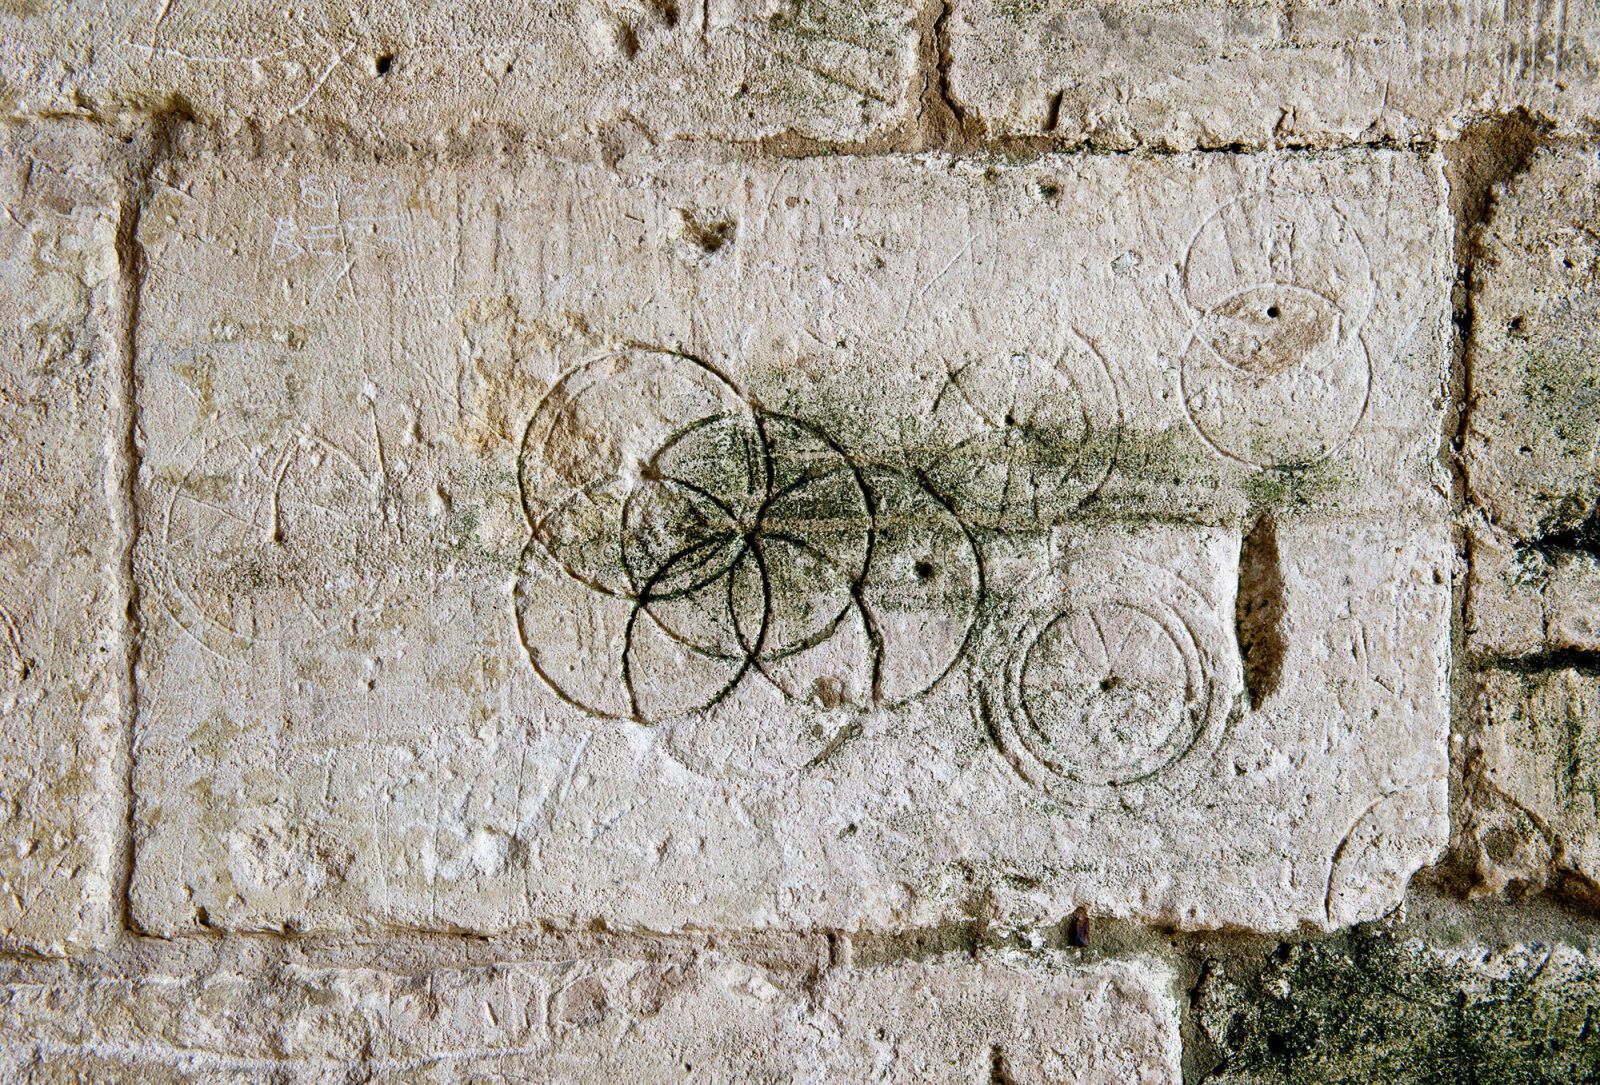 'Witches' marks' found in old church ruins Gallery-1506674951-witch-markings